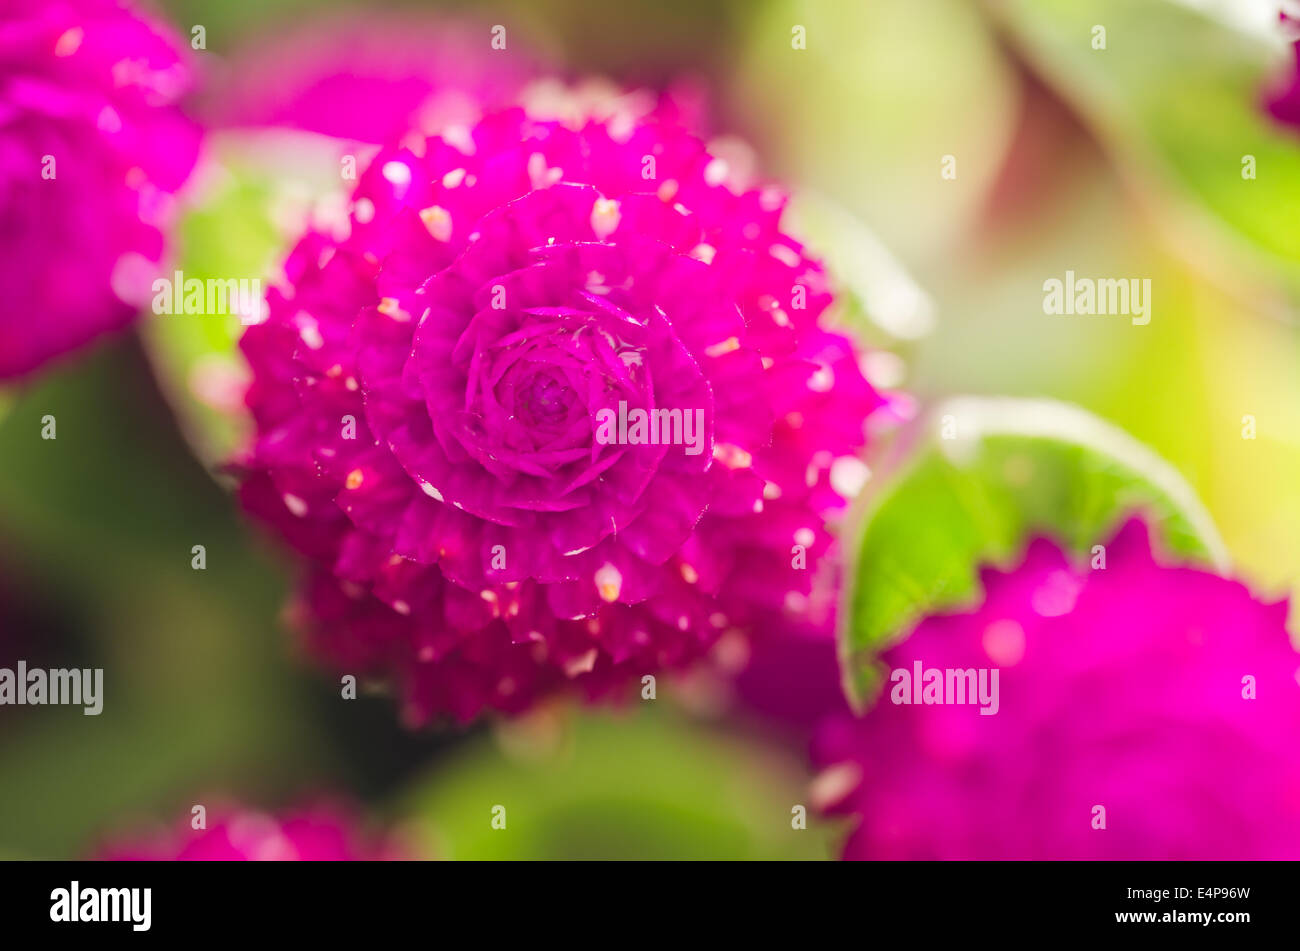 Globe Amaranth or Bachelor Button flower macro close-up shot in nature Stock Photo